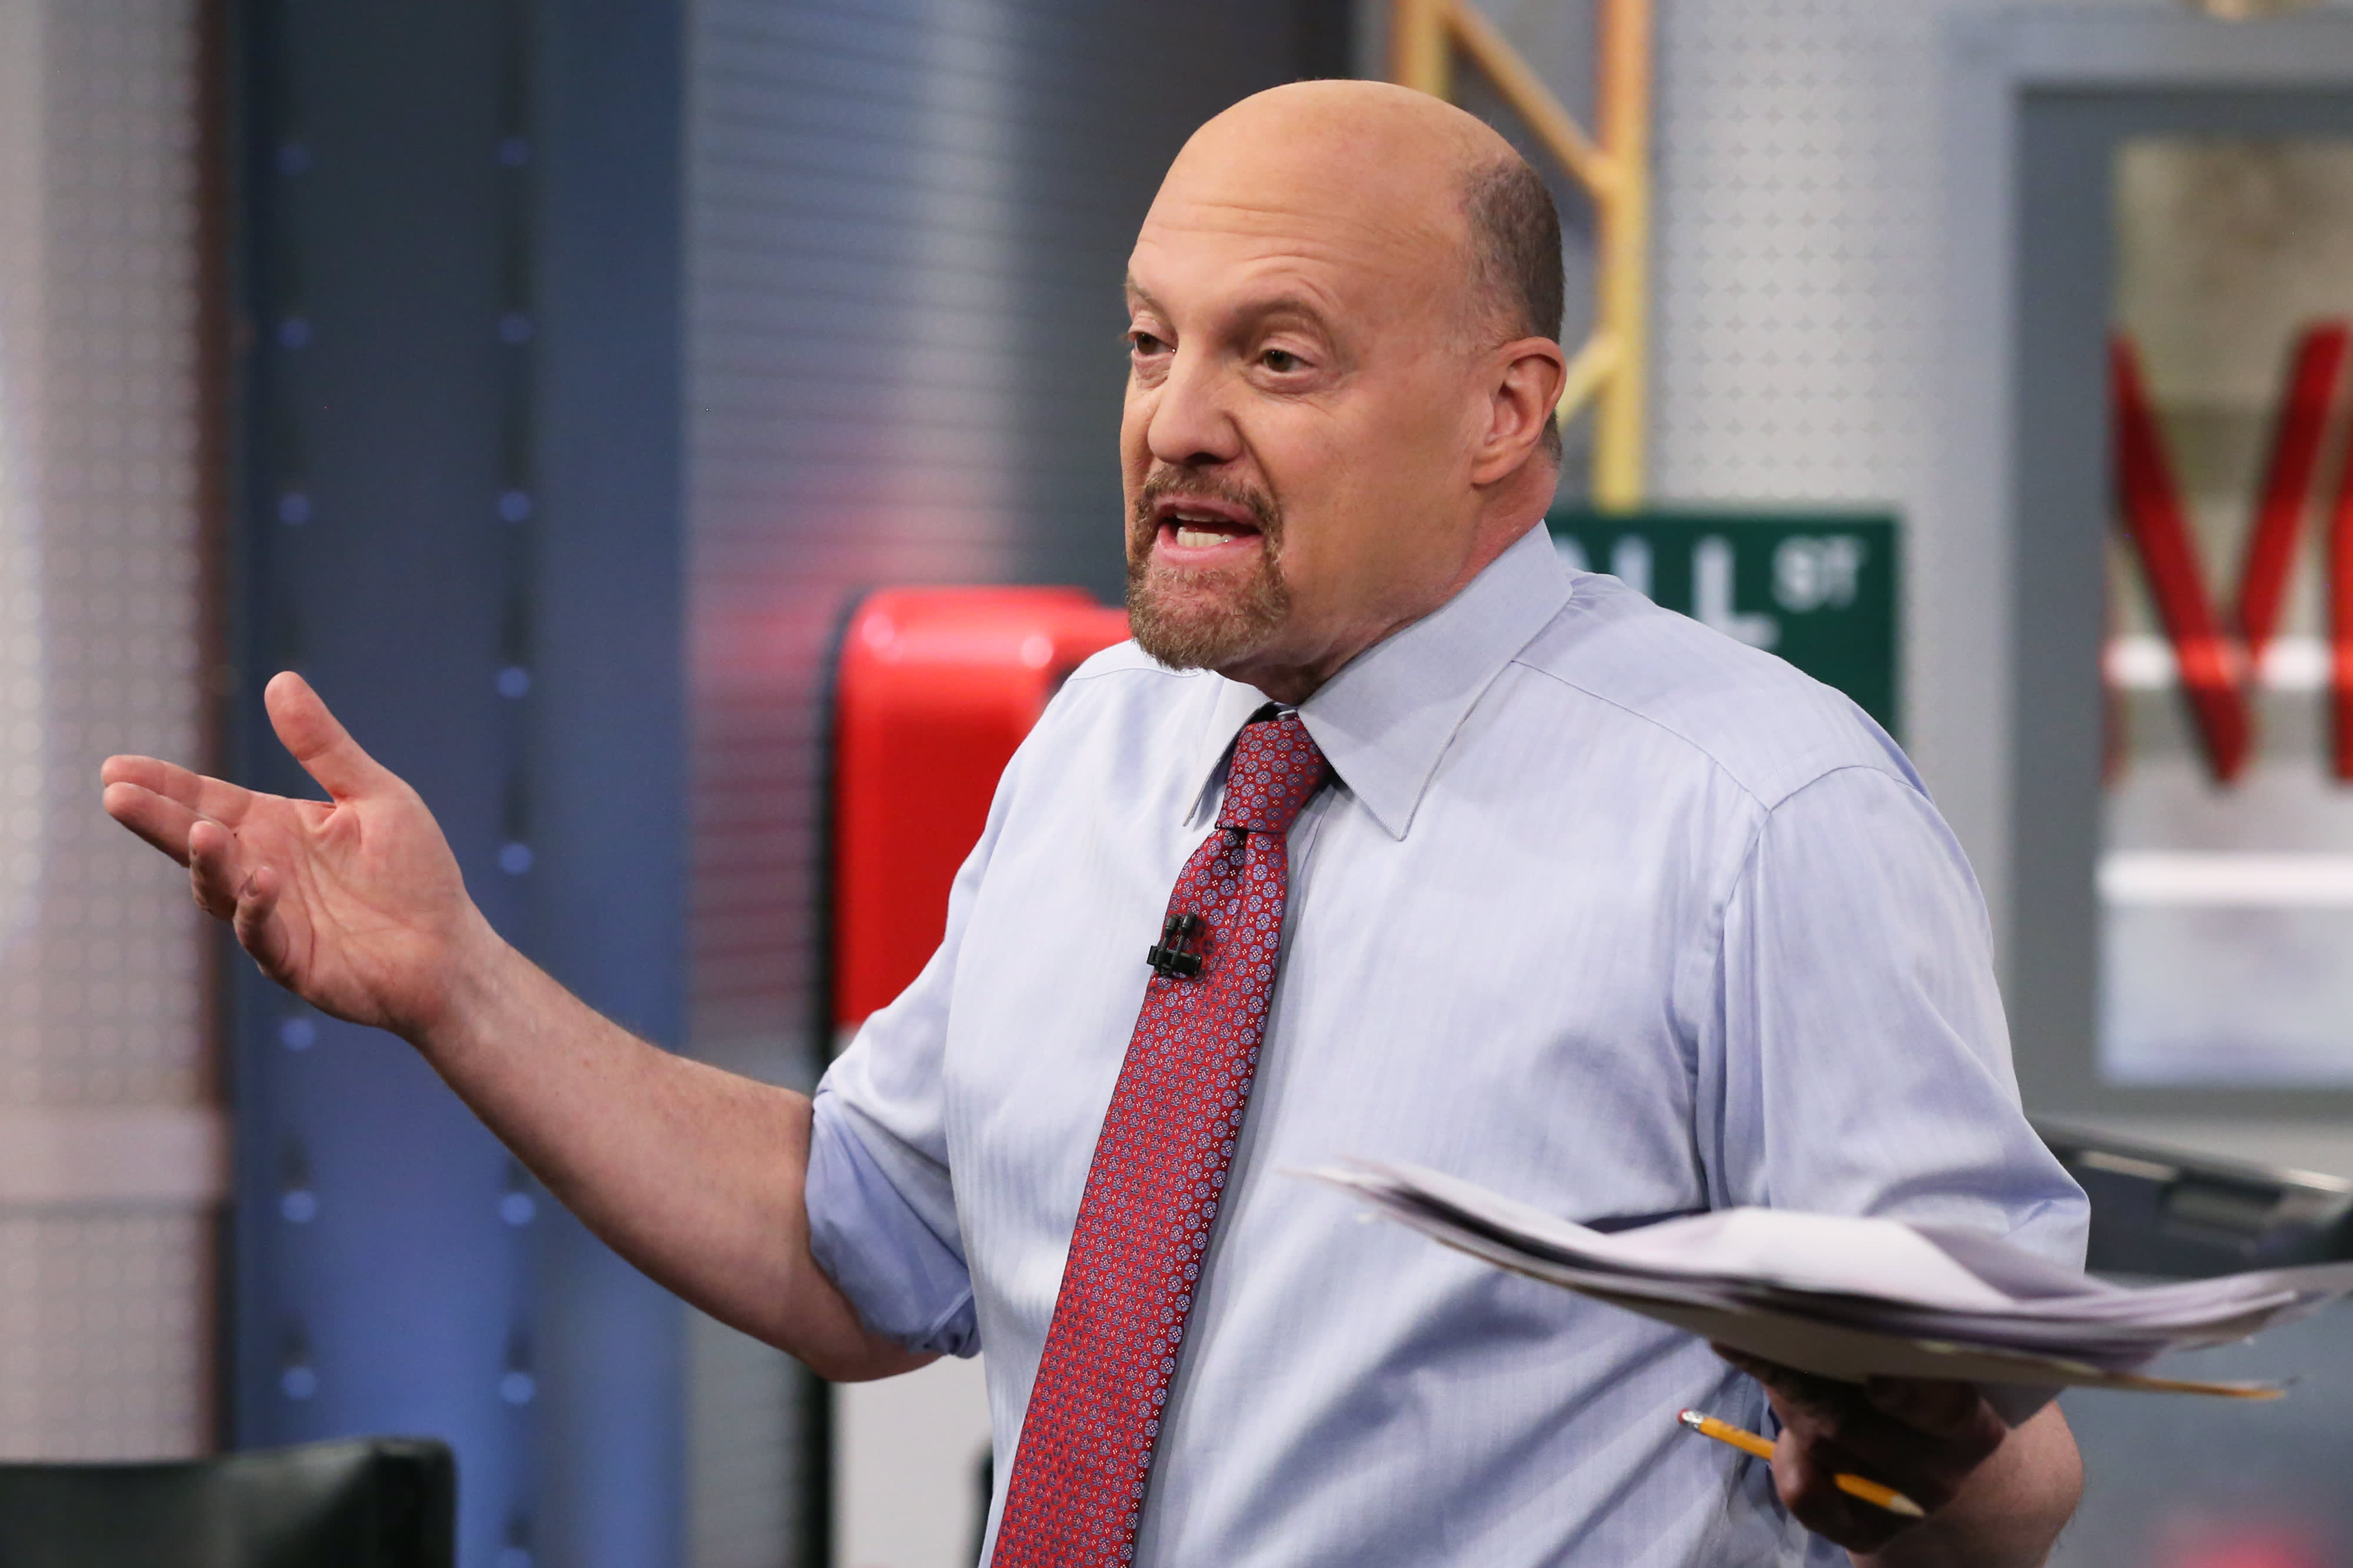 Market action shows the debt ceiling is not Wall Street’s concern, Cramer says